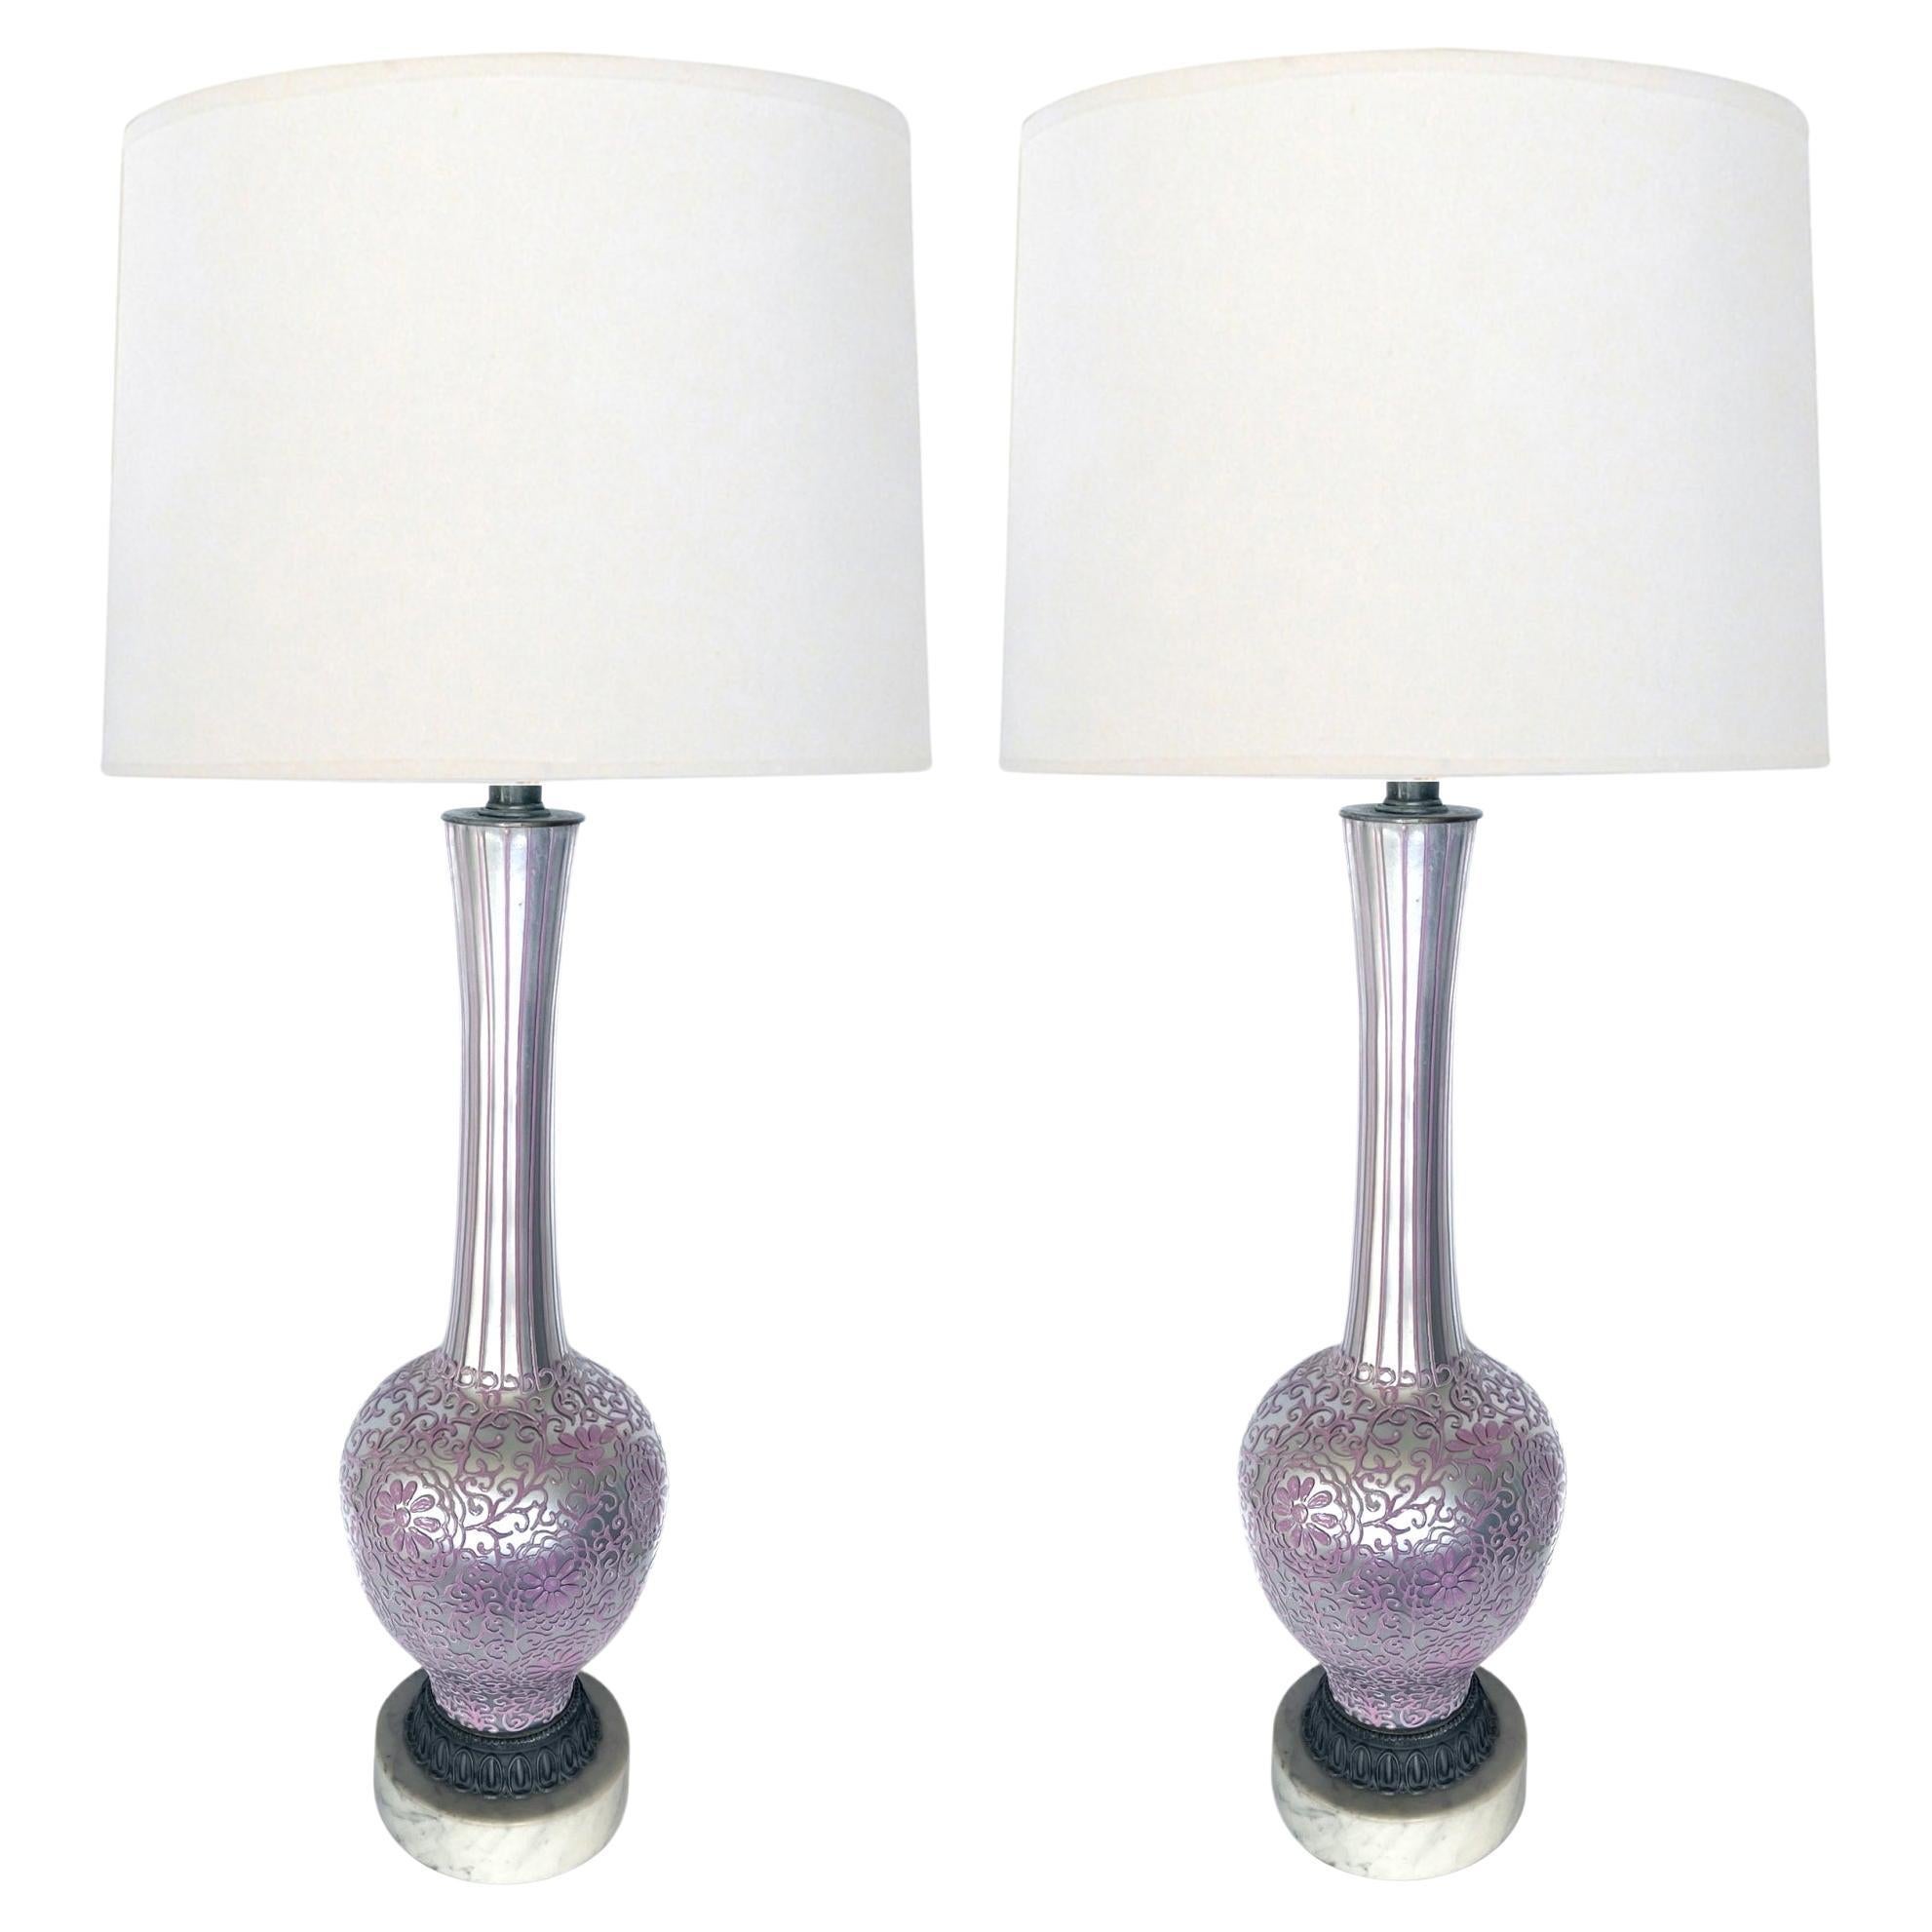 Tall Pair of 1960's Reverse-Silvered Lamps with Applied Floral Vine Decoration